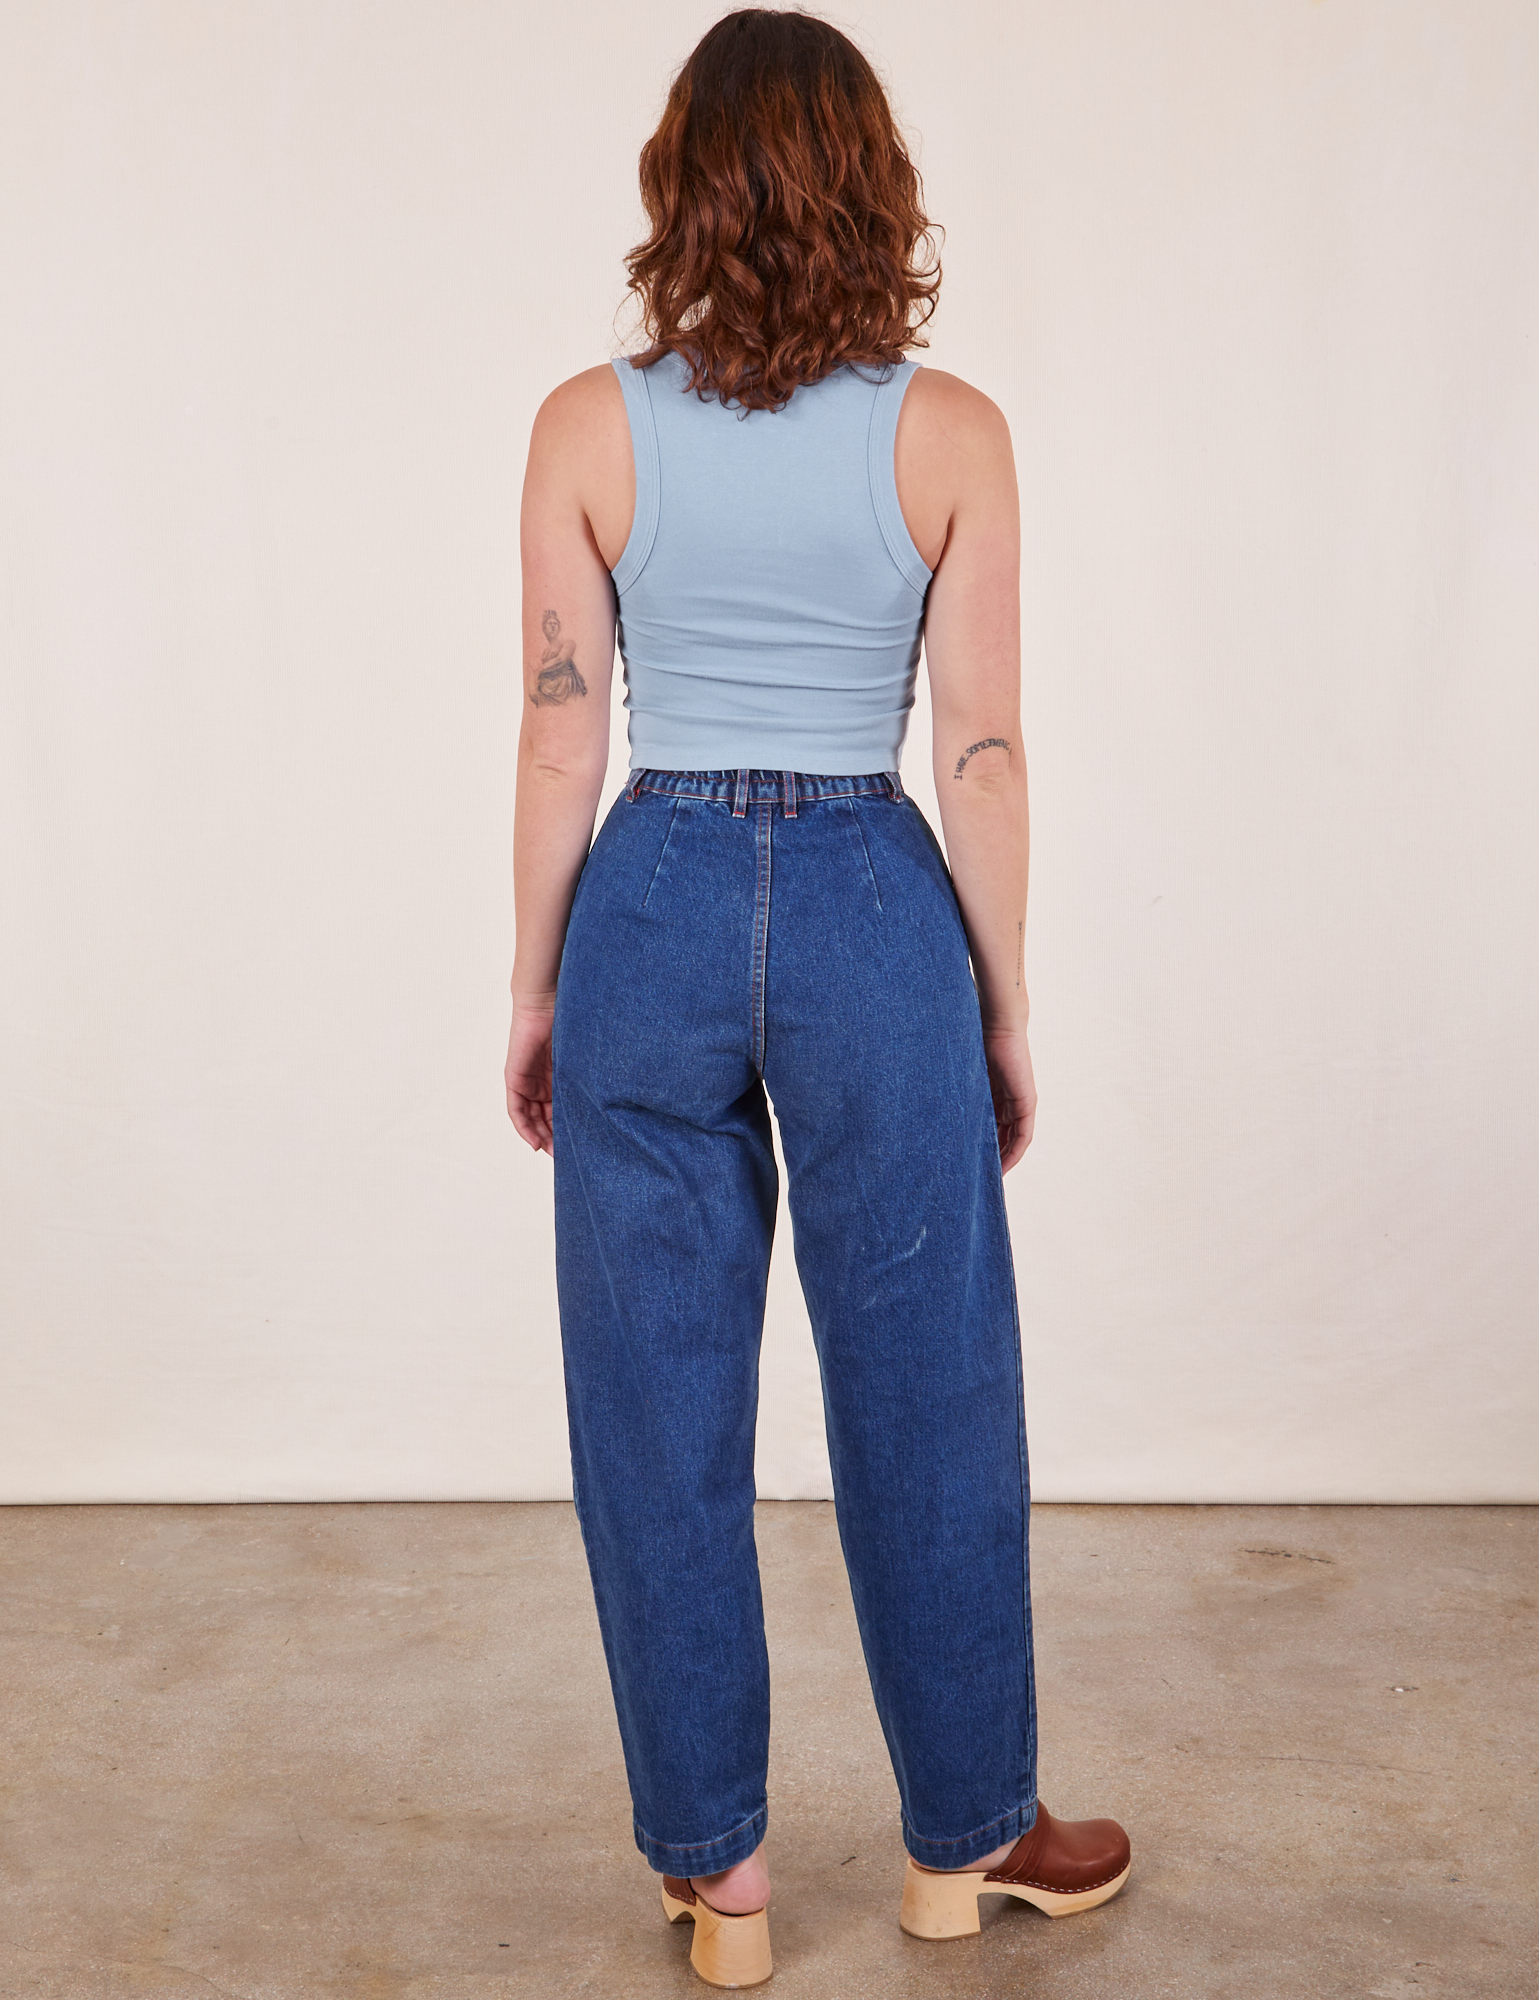 Back view of Cropped Tank Top in Periwinkle and dark wash Denim Trouser Jeans